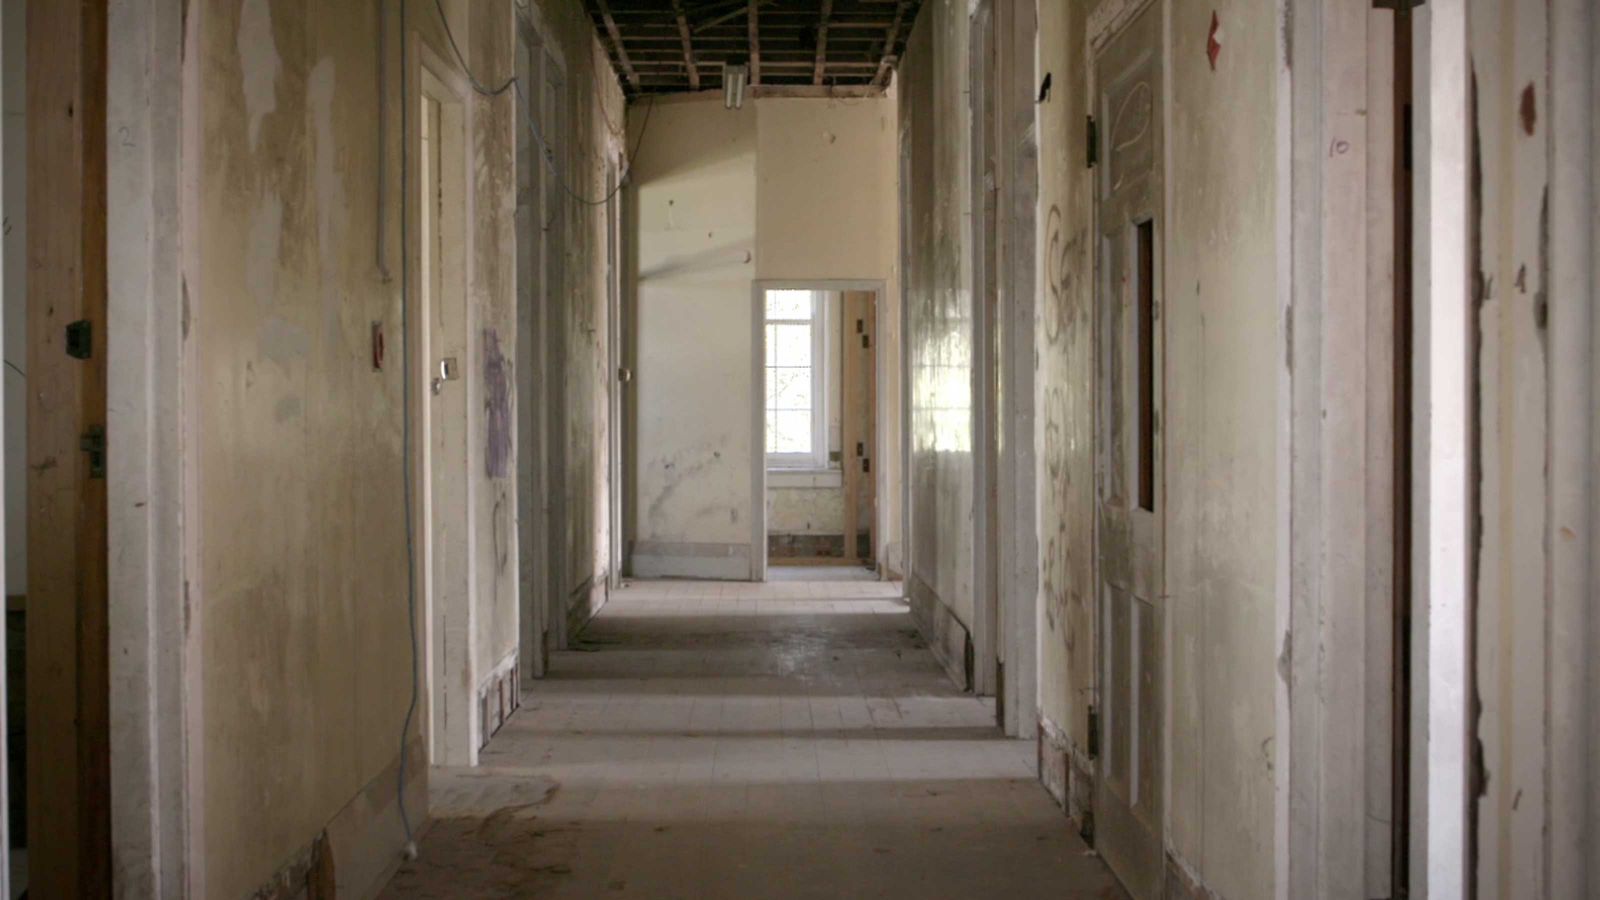 A still from 'Humans' – A hallway with doors several doors in a dilapidated building with dusty wooden floors.